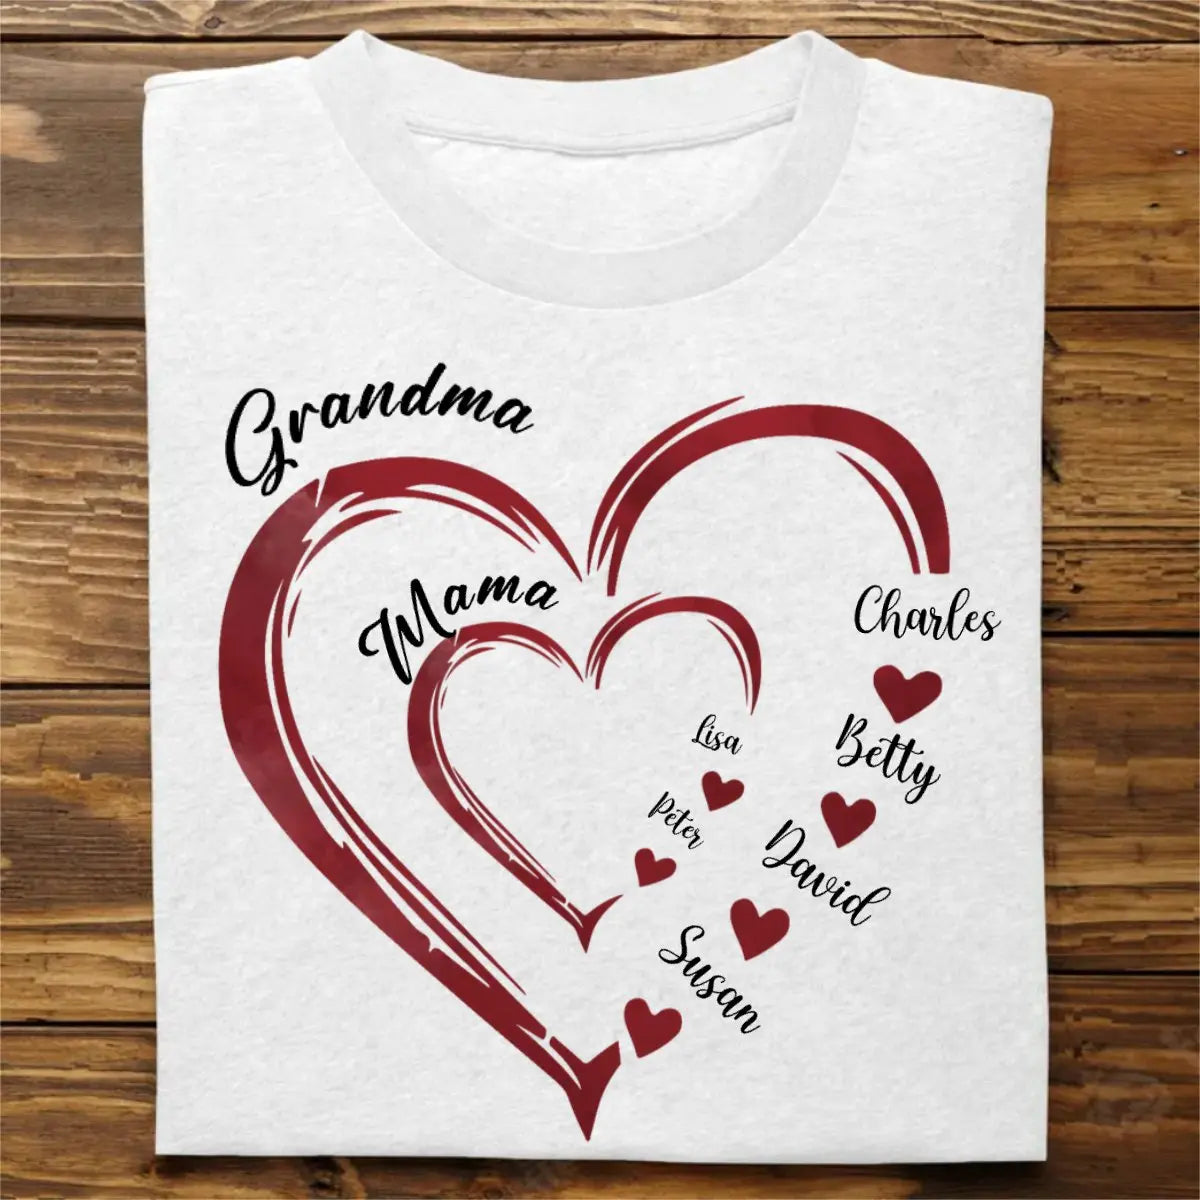 Family - Mommy's Sweethearts - Personalized Unisex T-Shirt, Hoodie , Sweatshirt (HJ)